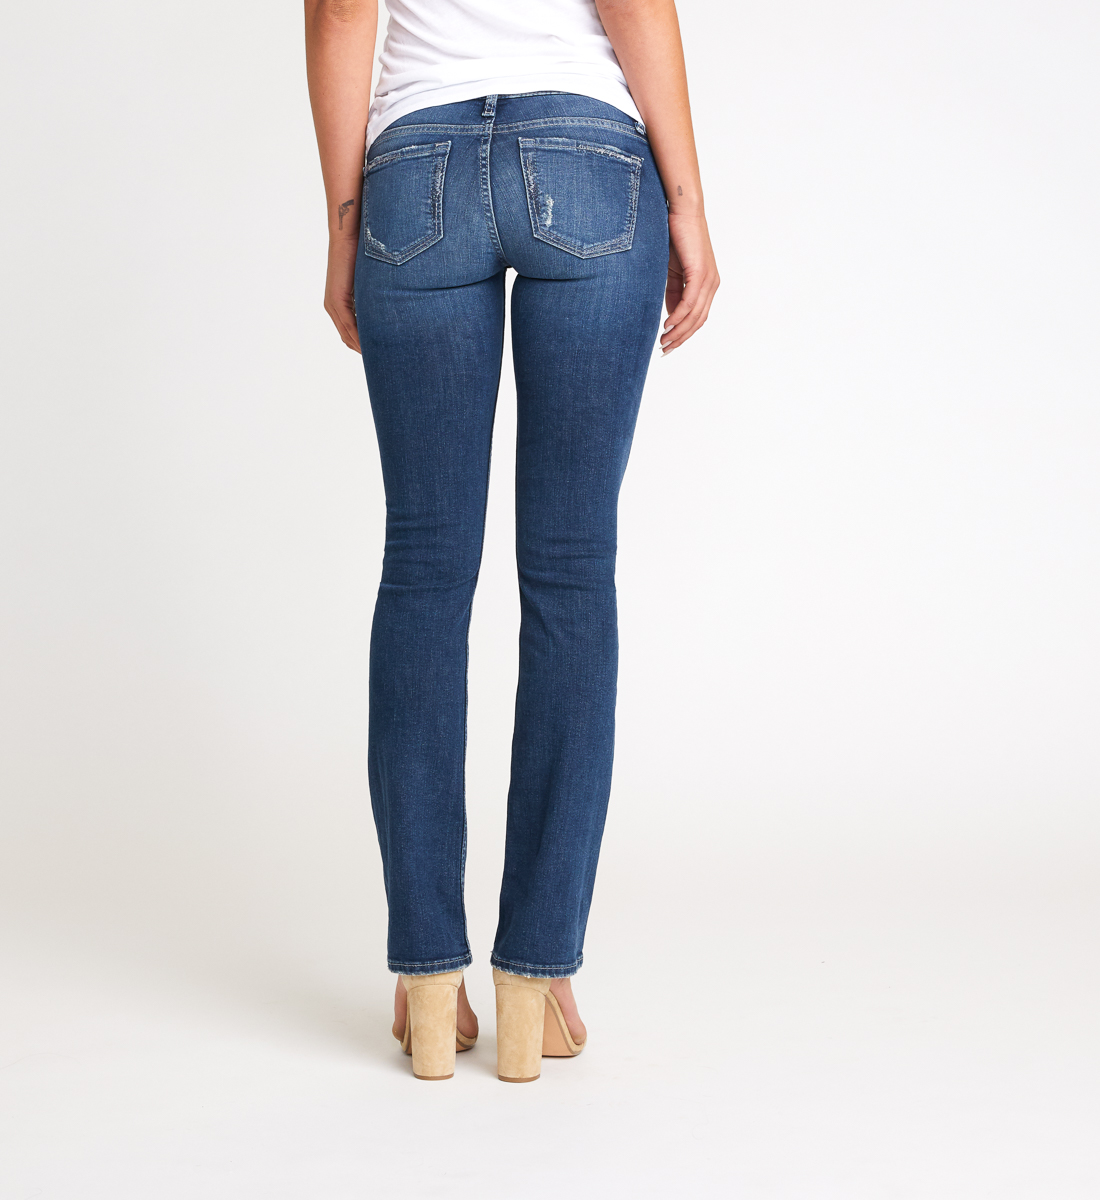 tuesday low rise slim bootcut jeans